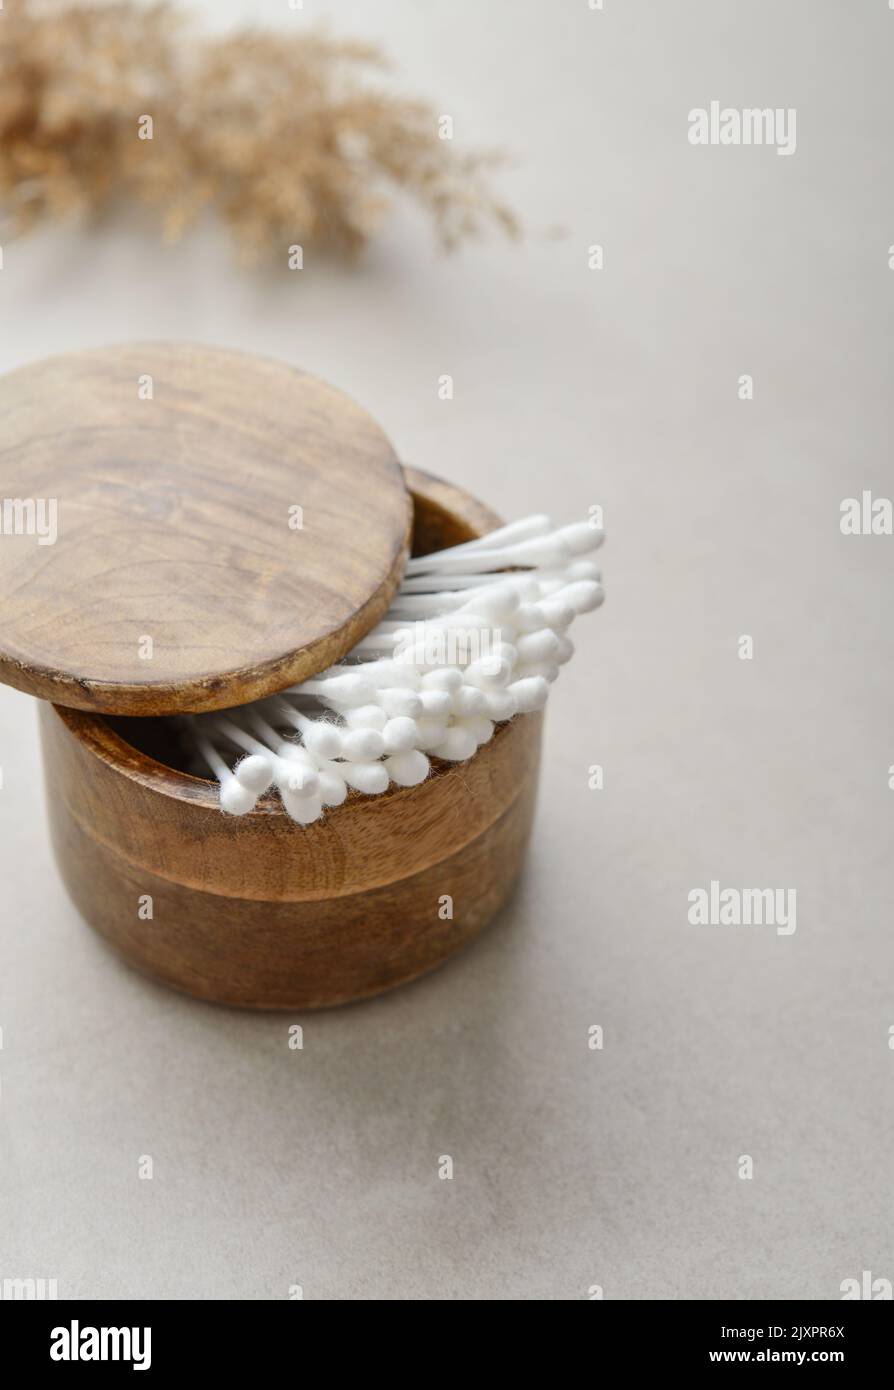 Сotton buds in wooden box on a light concrete background Stock Photo